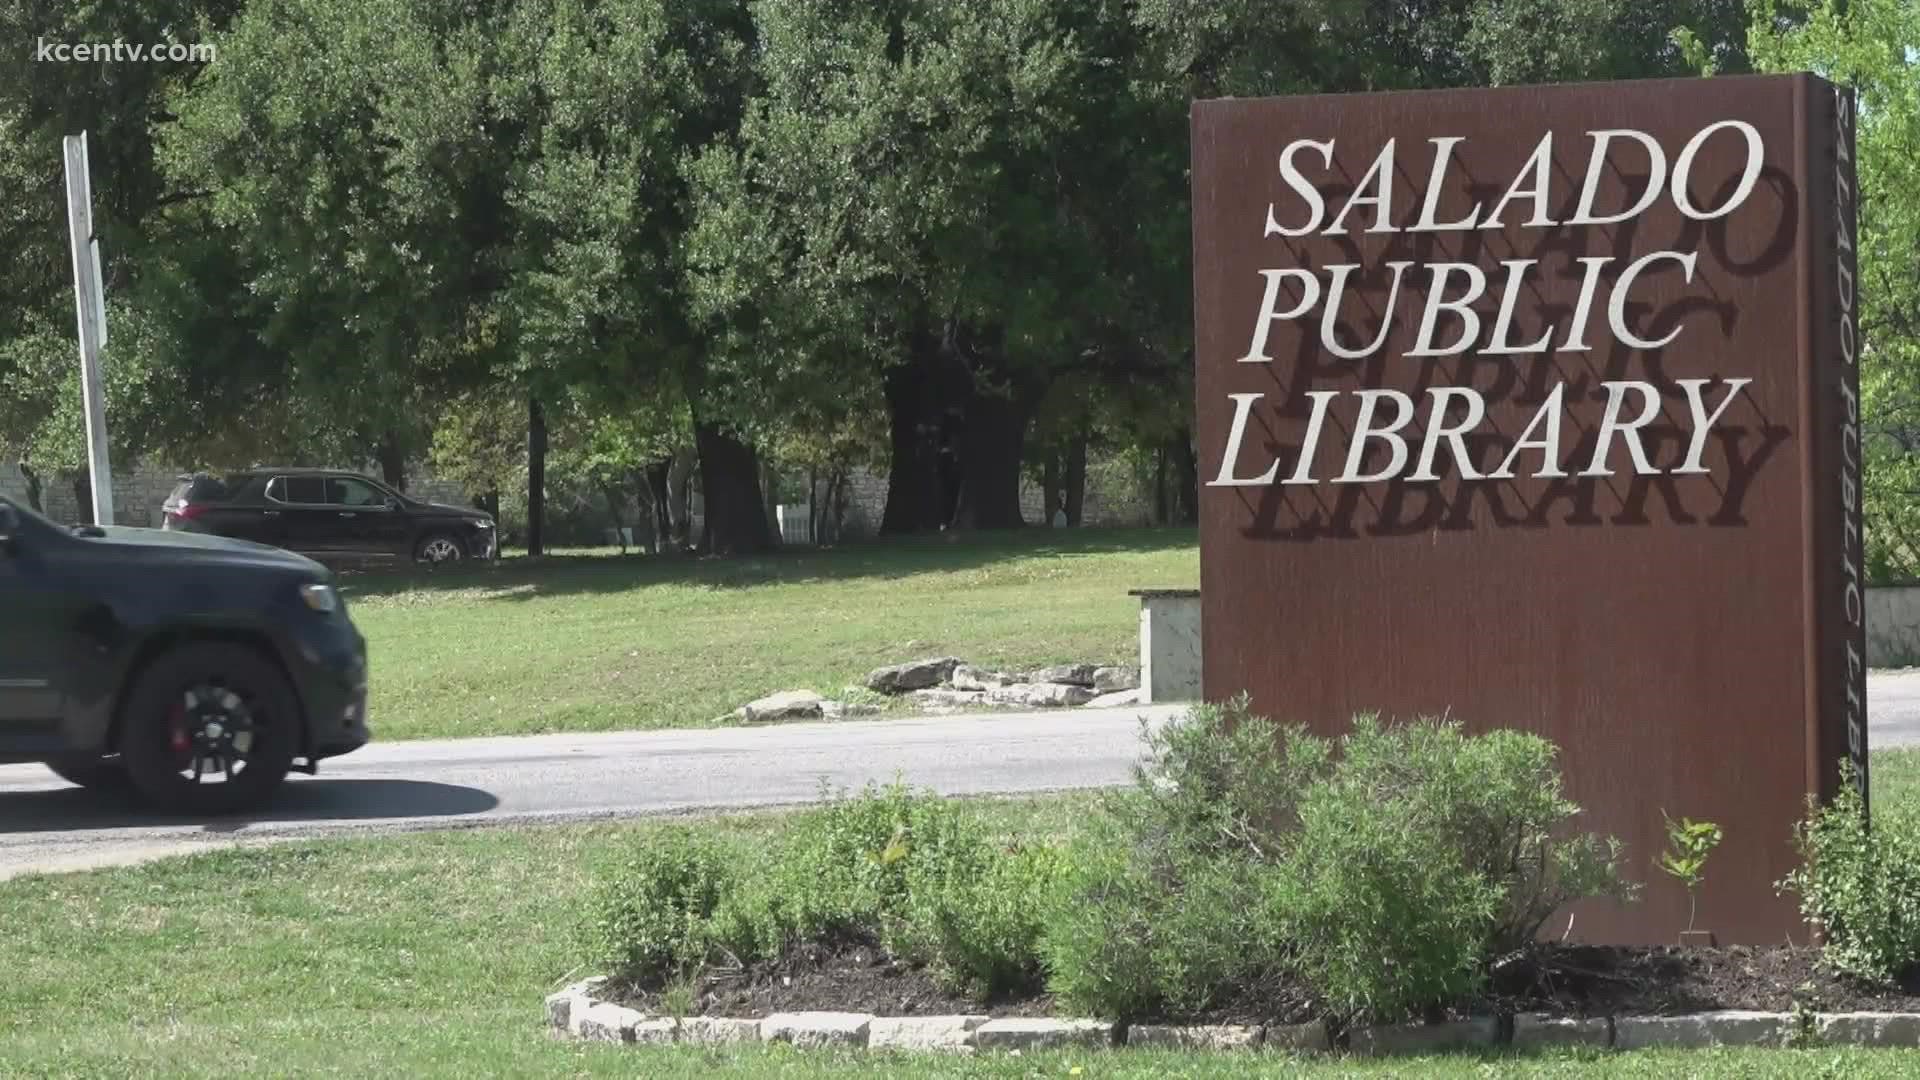 For those who may find personal items like photos, keepsakes can bring them to the Salado Public Library in hopes to get them back to their original owners.